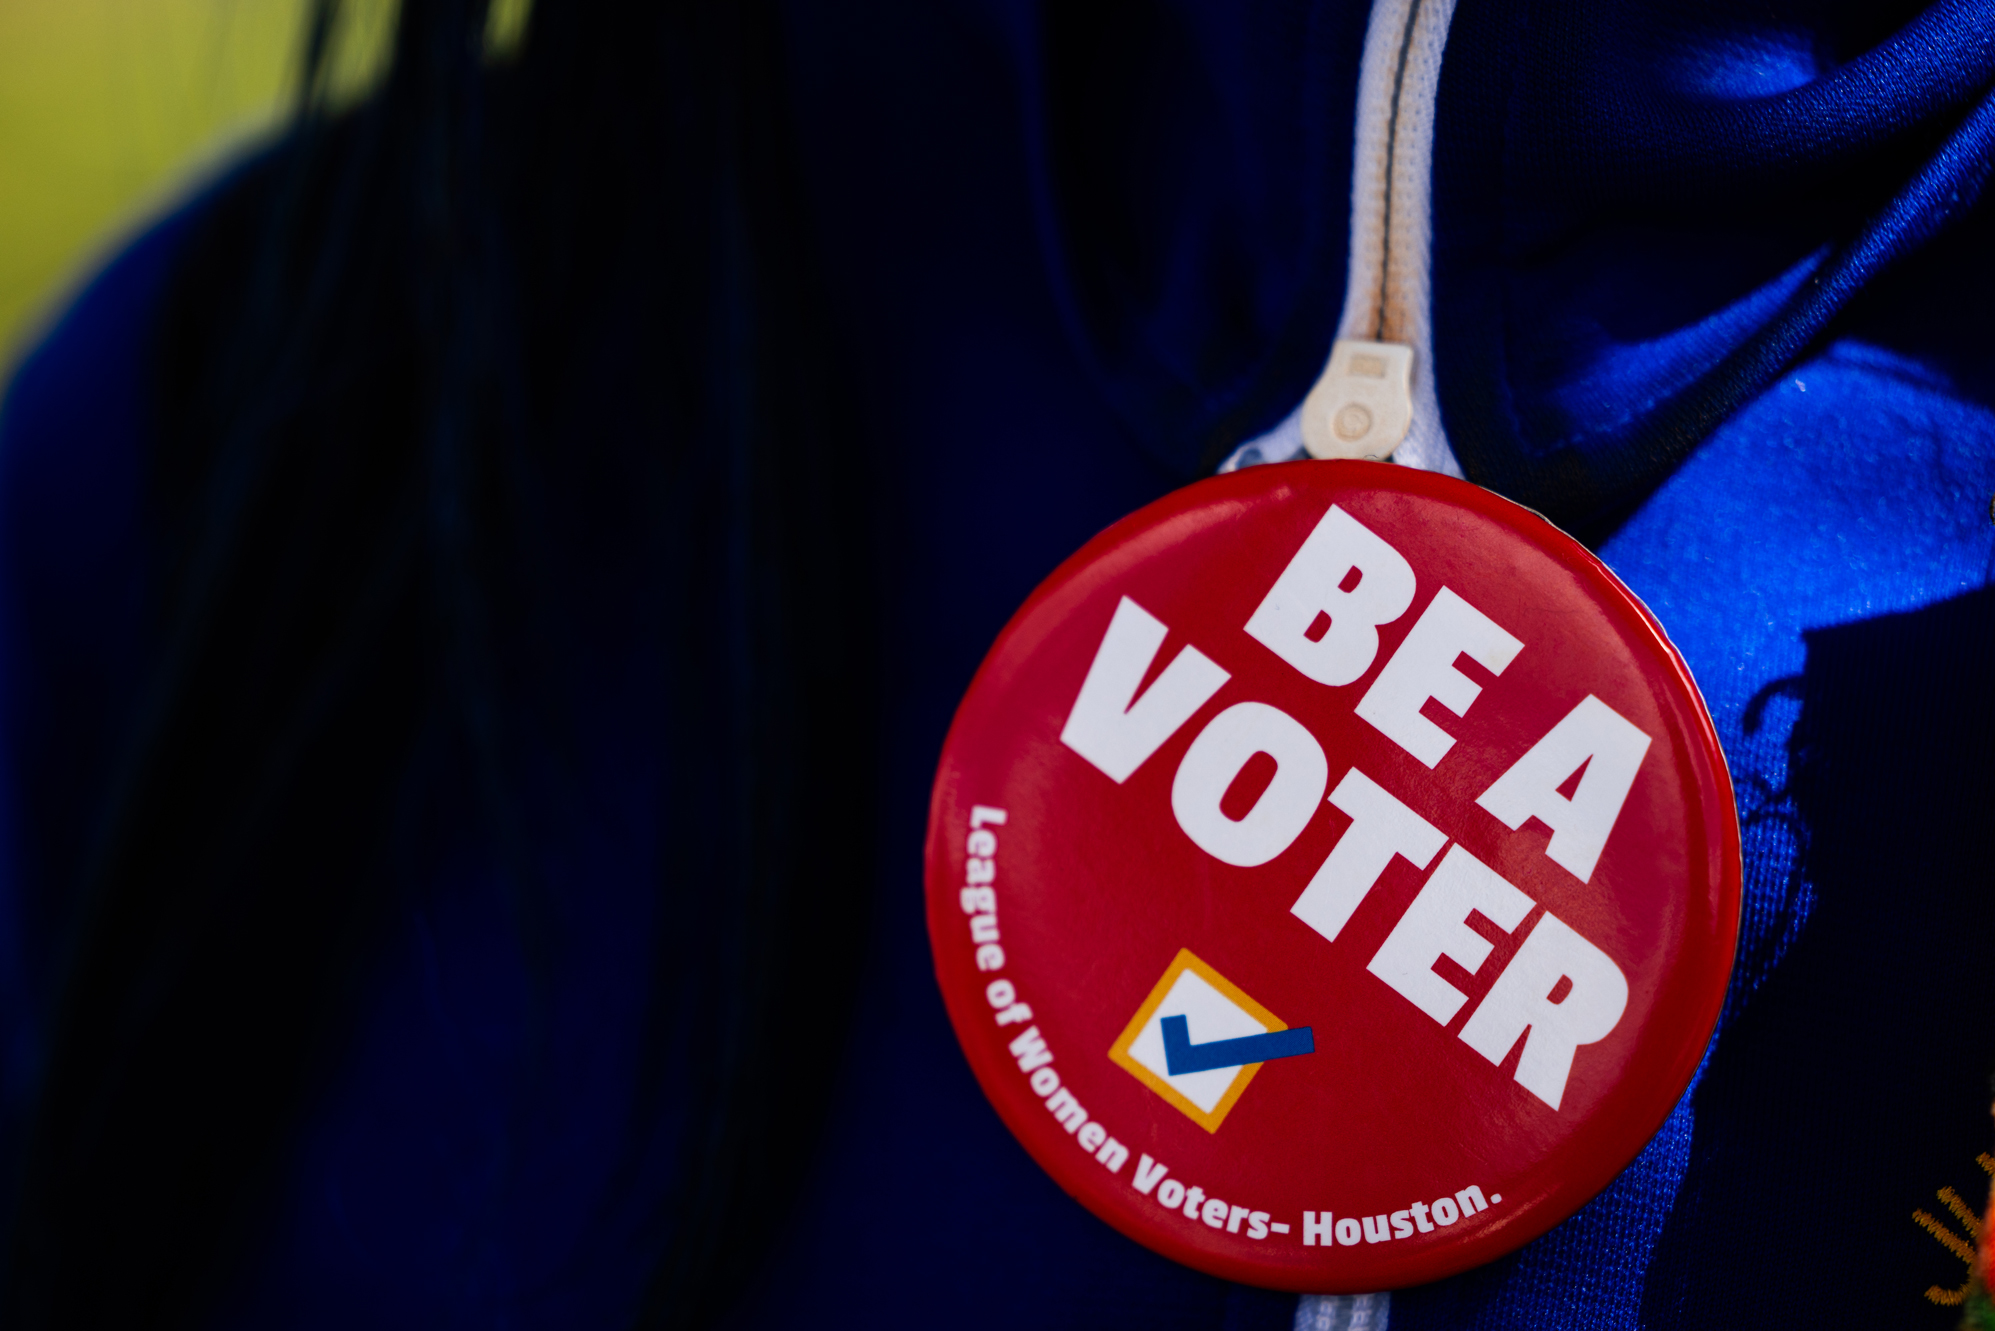 “Be a Voter” election button, Tuesday, Nov. 7, 2023, in Houston.